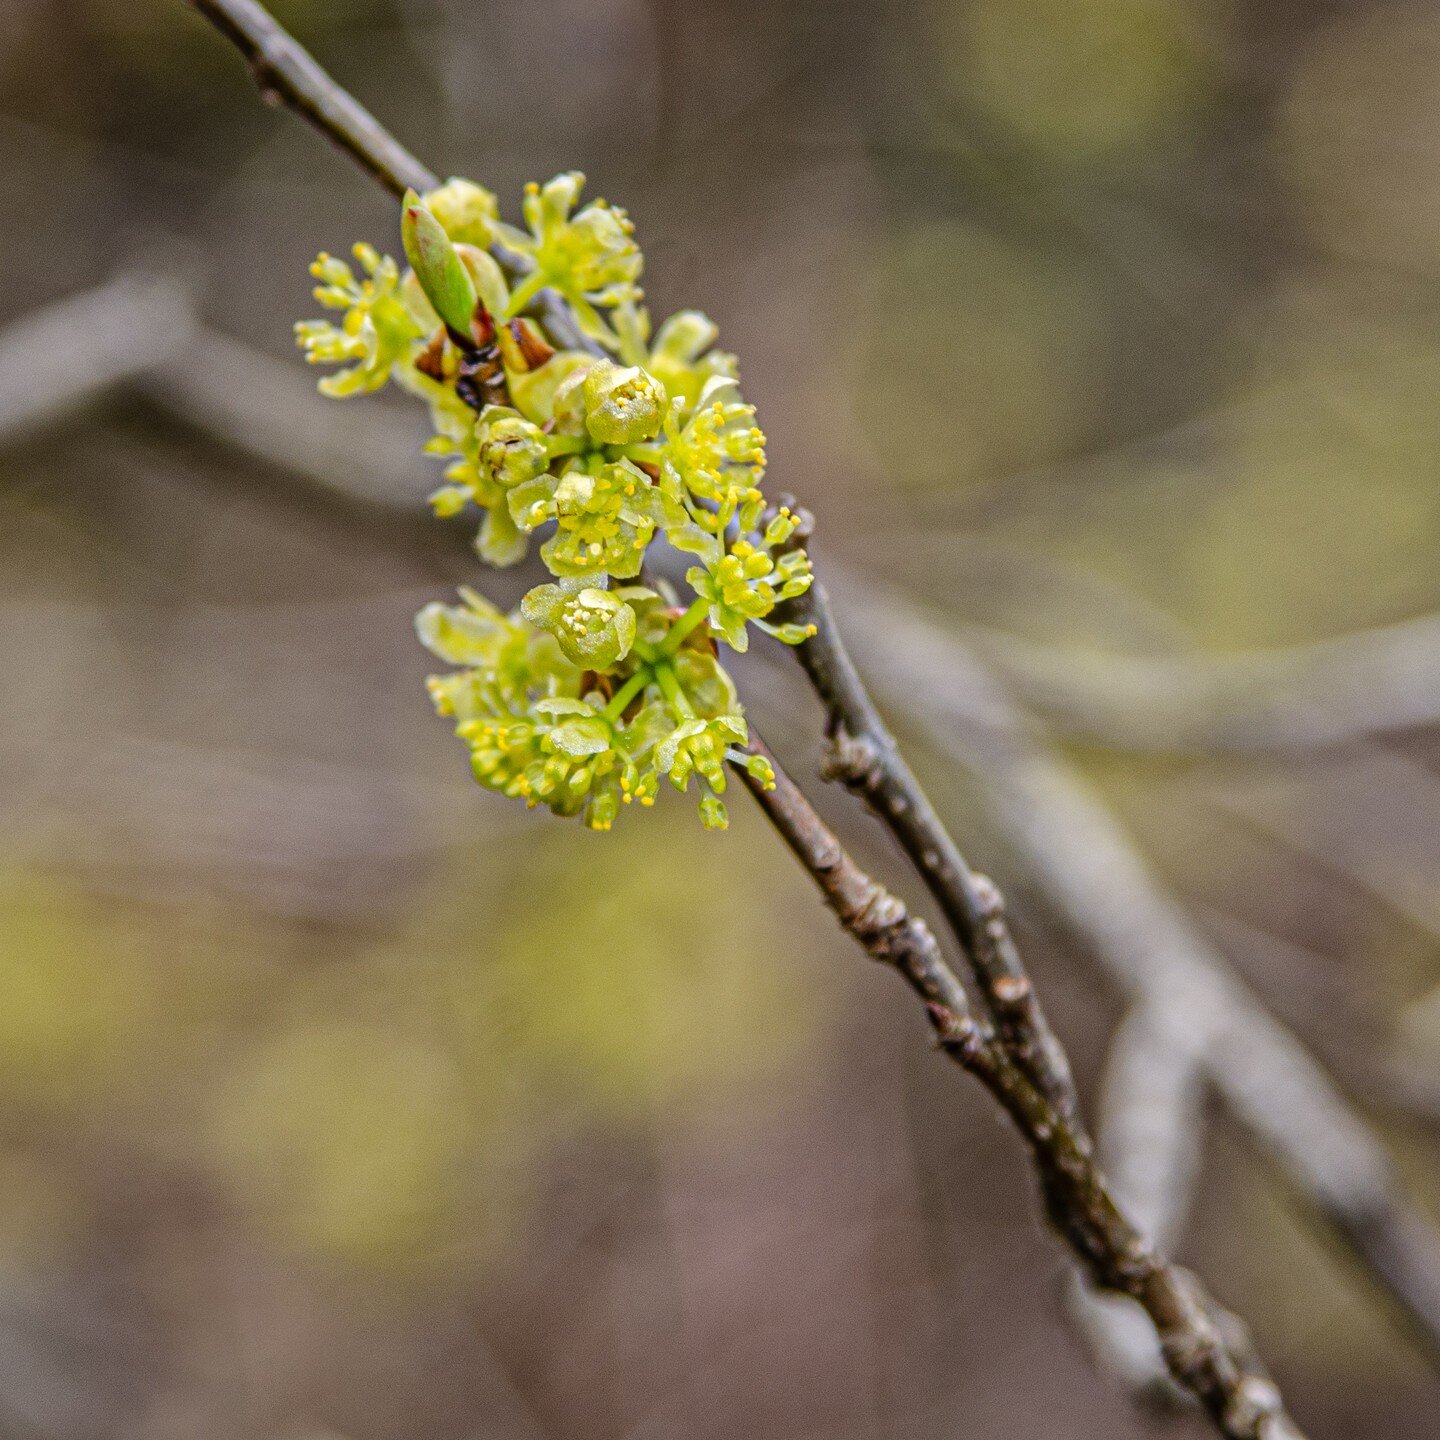 One of the most lovely and delicate flowering shrubs of early spring is the spicebush (Lindera benzoin). This 10&rsquo; x 10&rsquo; shrub grows in wetland areas, but can take periods of drought. It is a larval host plant for the Spicebush Swallowtail